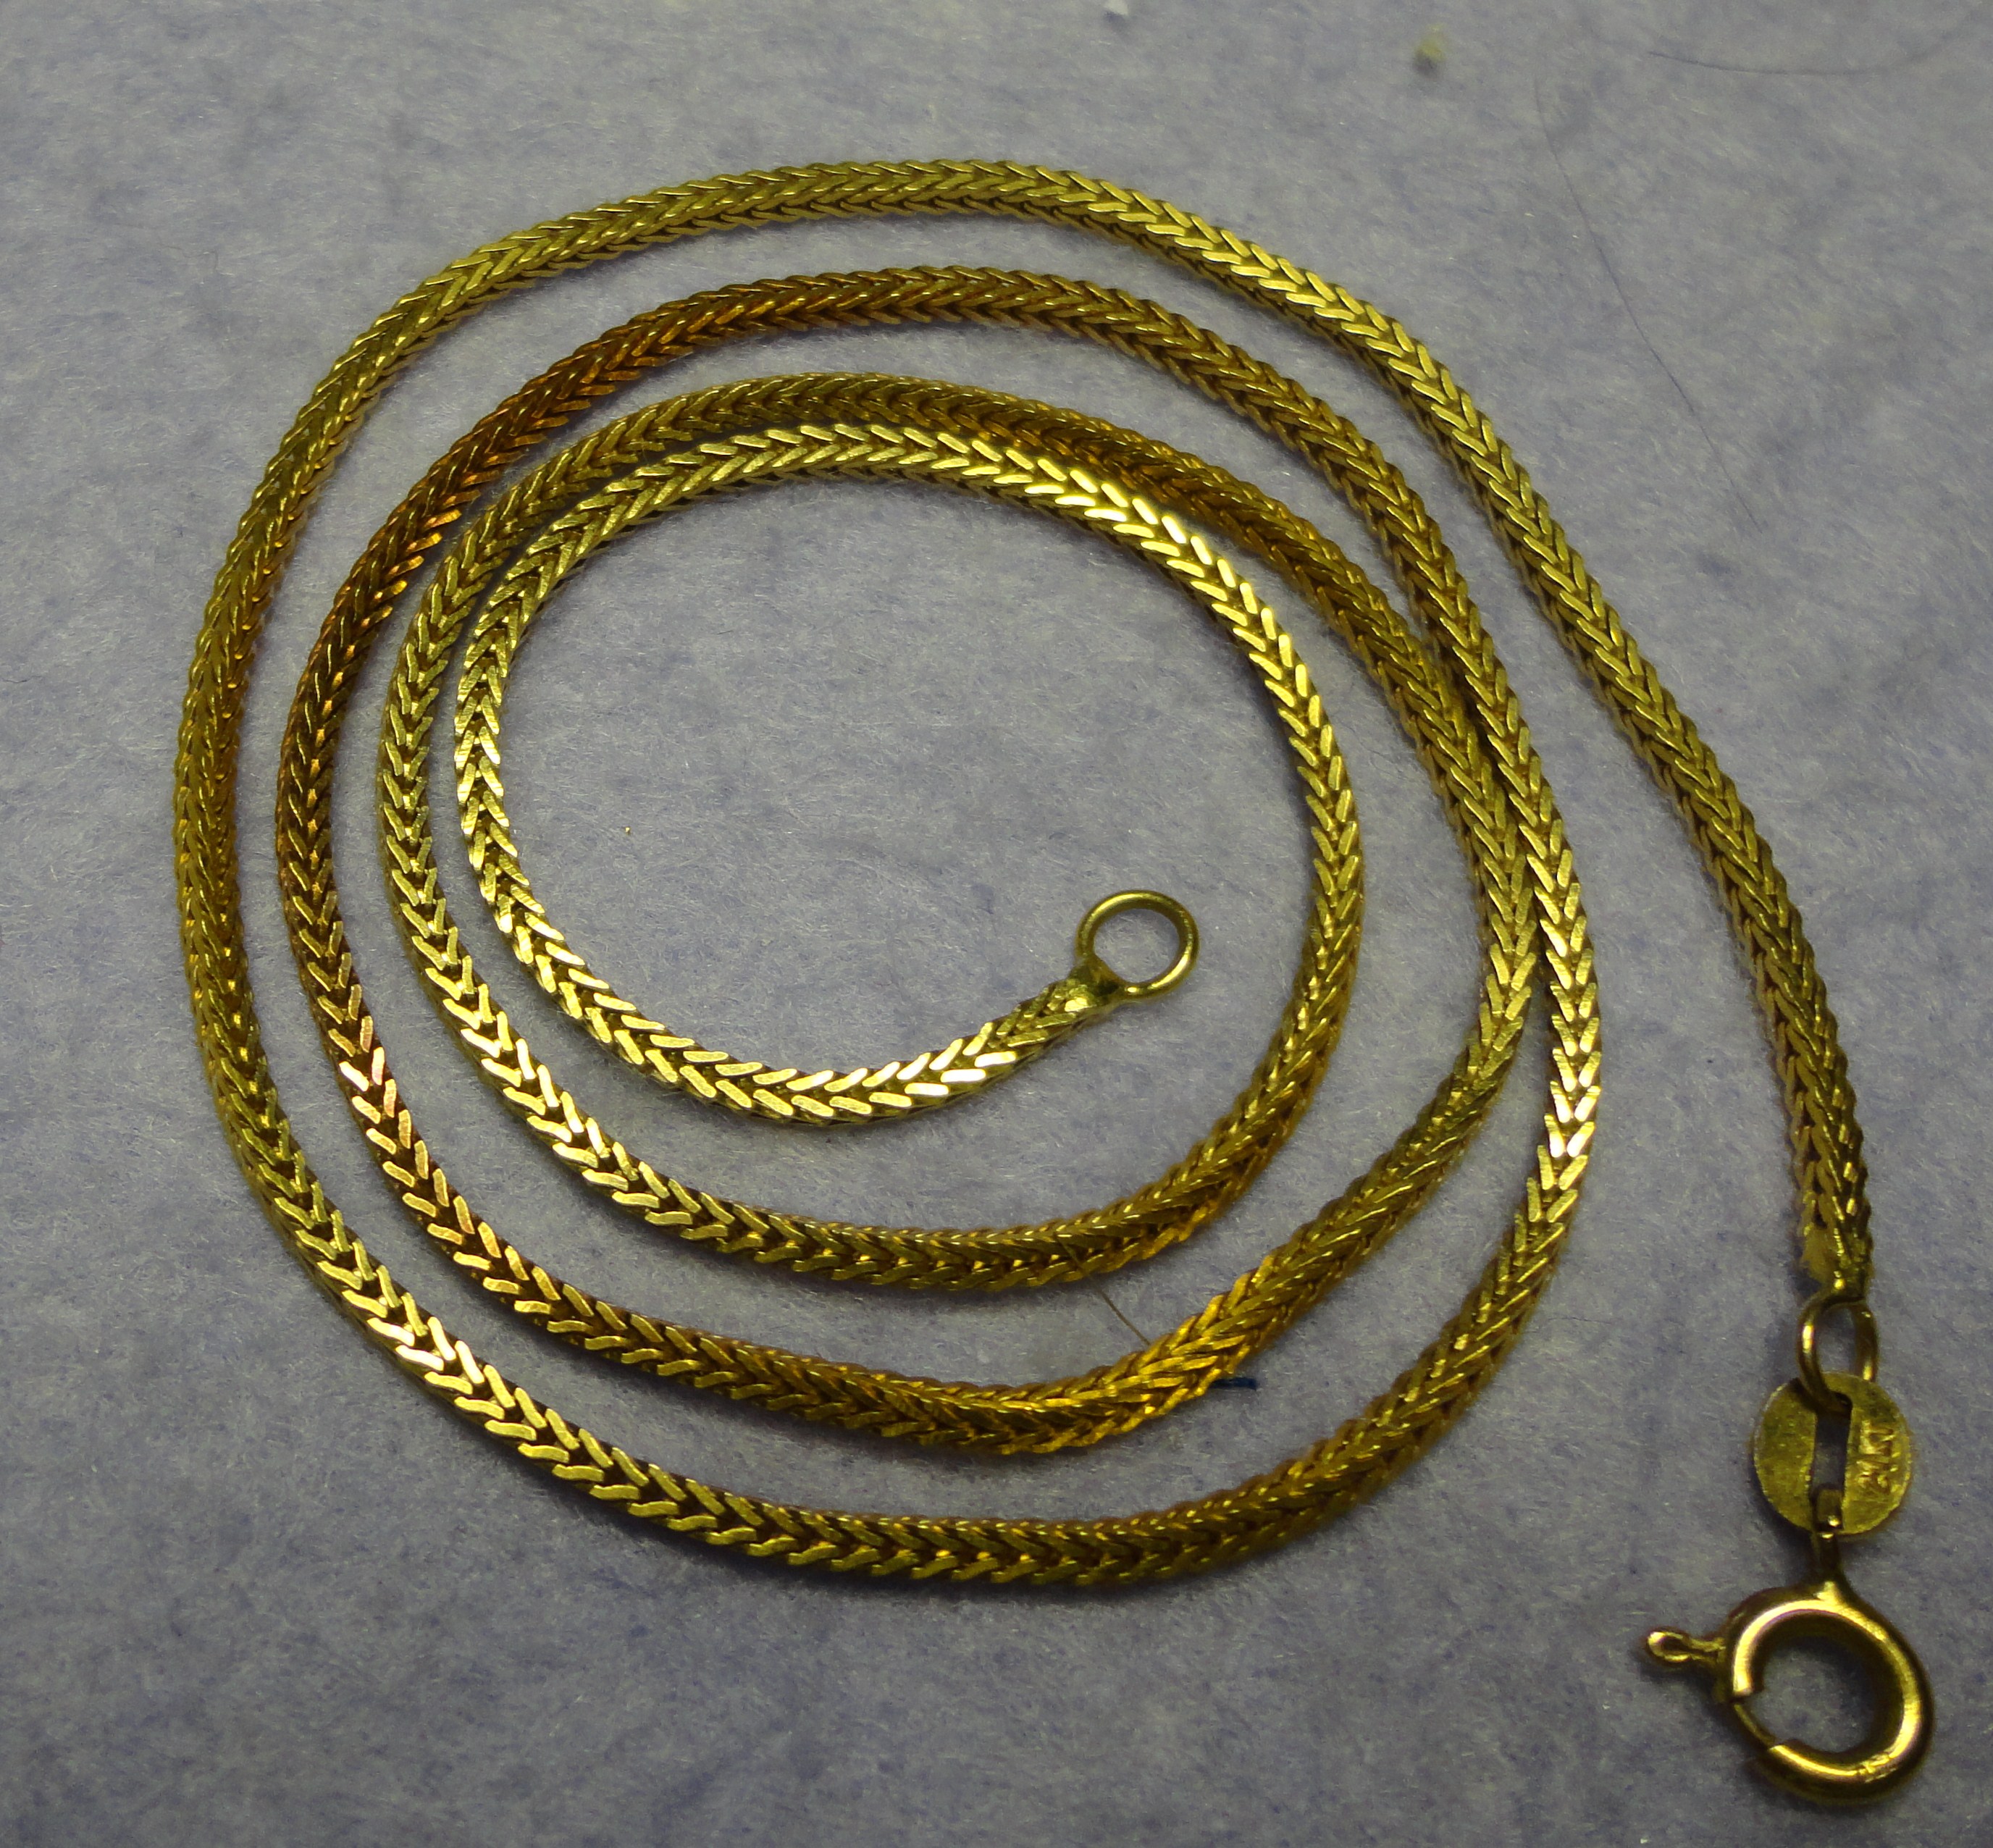 CHAIN 21KT 1.6 MM X 20 INCHES 10.7 GR